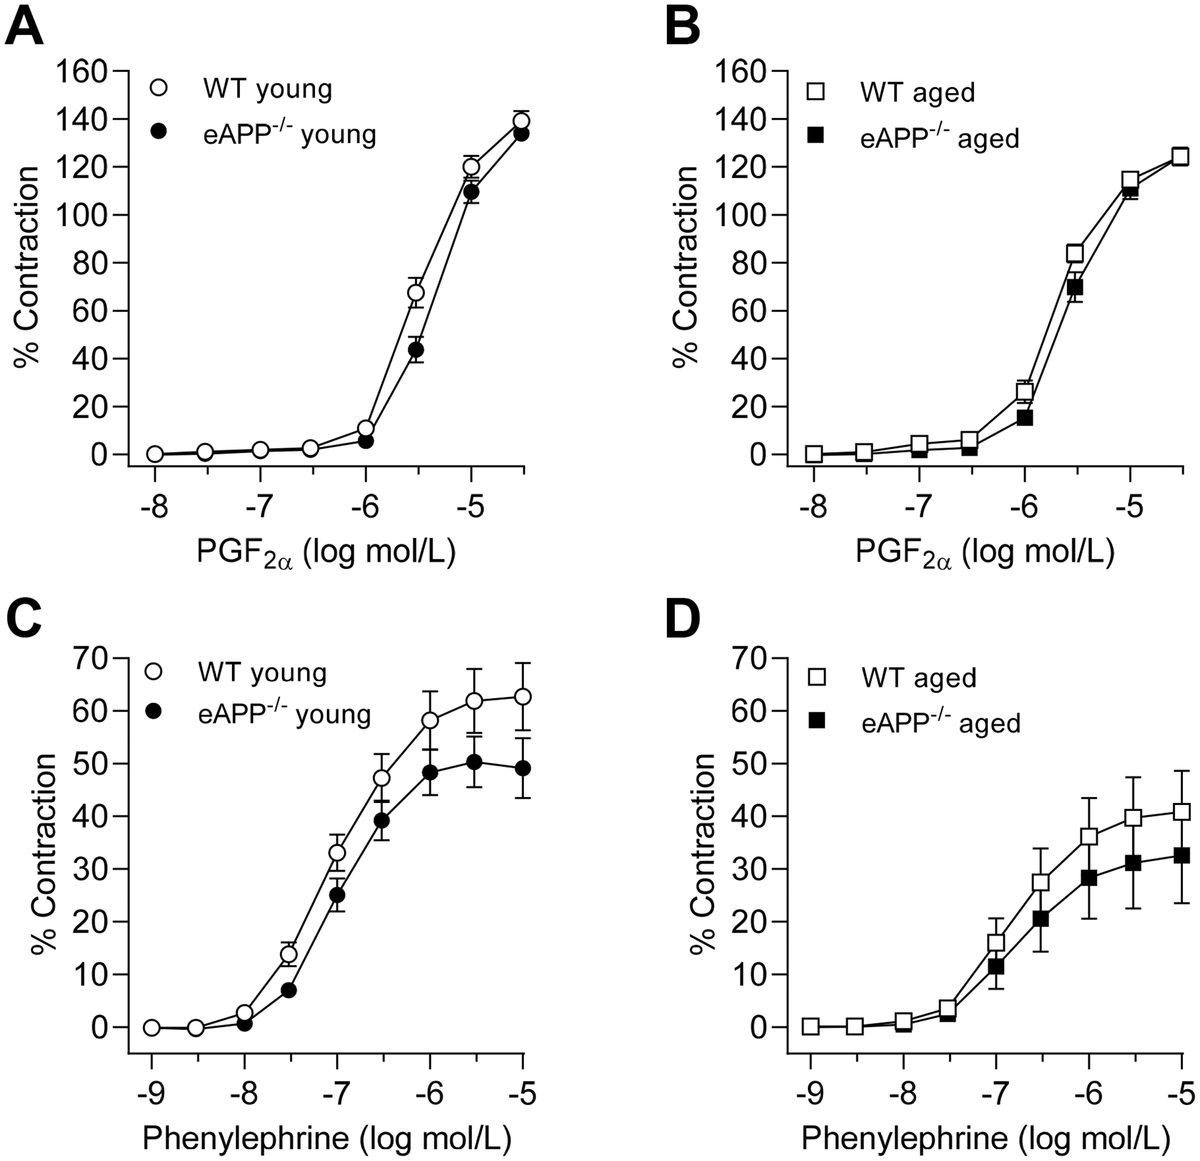 Concentration-dependent contractions to PGF2α (A, B) and phenylephrine (C, D) in isolated aortic rings derived from young and aged eAPP−/− mice and their respective wild-type (WT) littermates. Results are shown as mean ± SEM (n=9 per group for young WT littermates and eAPP−/− mice and n=8 per group for aged WT littermates and eAPP−/− mice) and contractions are expressed as percentage of response to a second KCl (80 mmol/L). No significant differences were detected between WT littermates and eAPP−/− mice at same age (ANOVA with Bonferroni's correction).